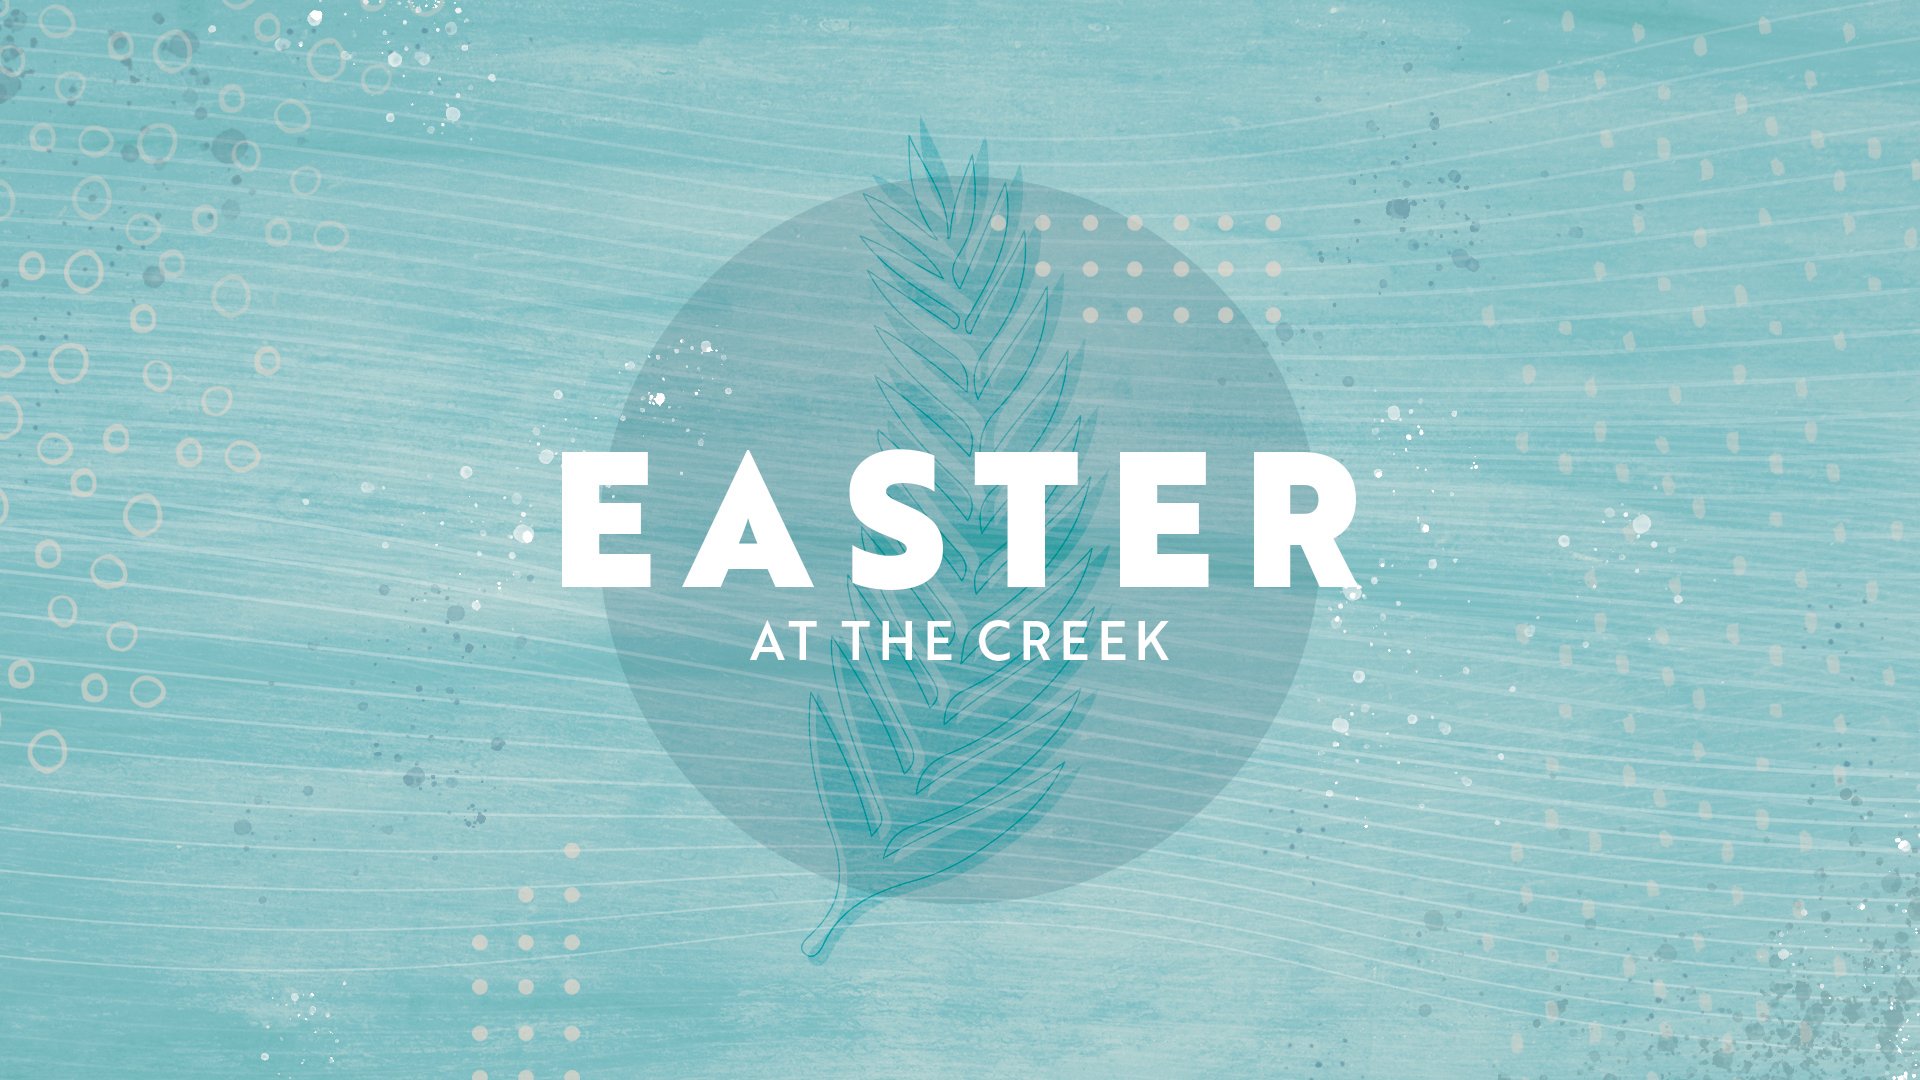 THE CREEK | EASTER 2019